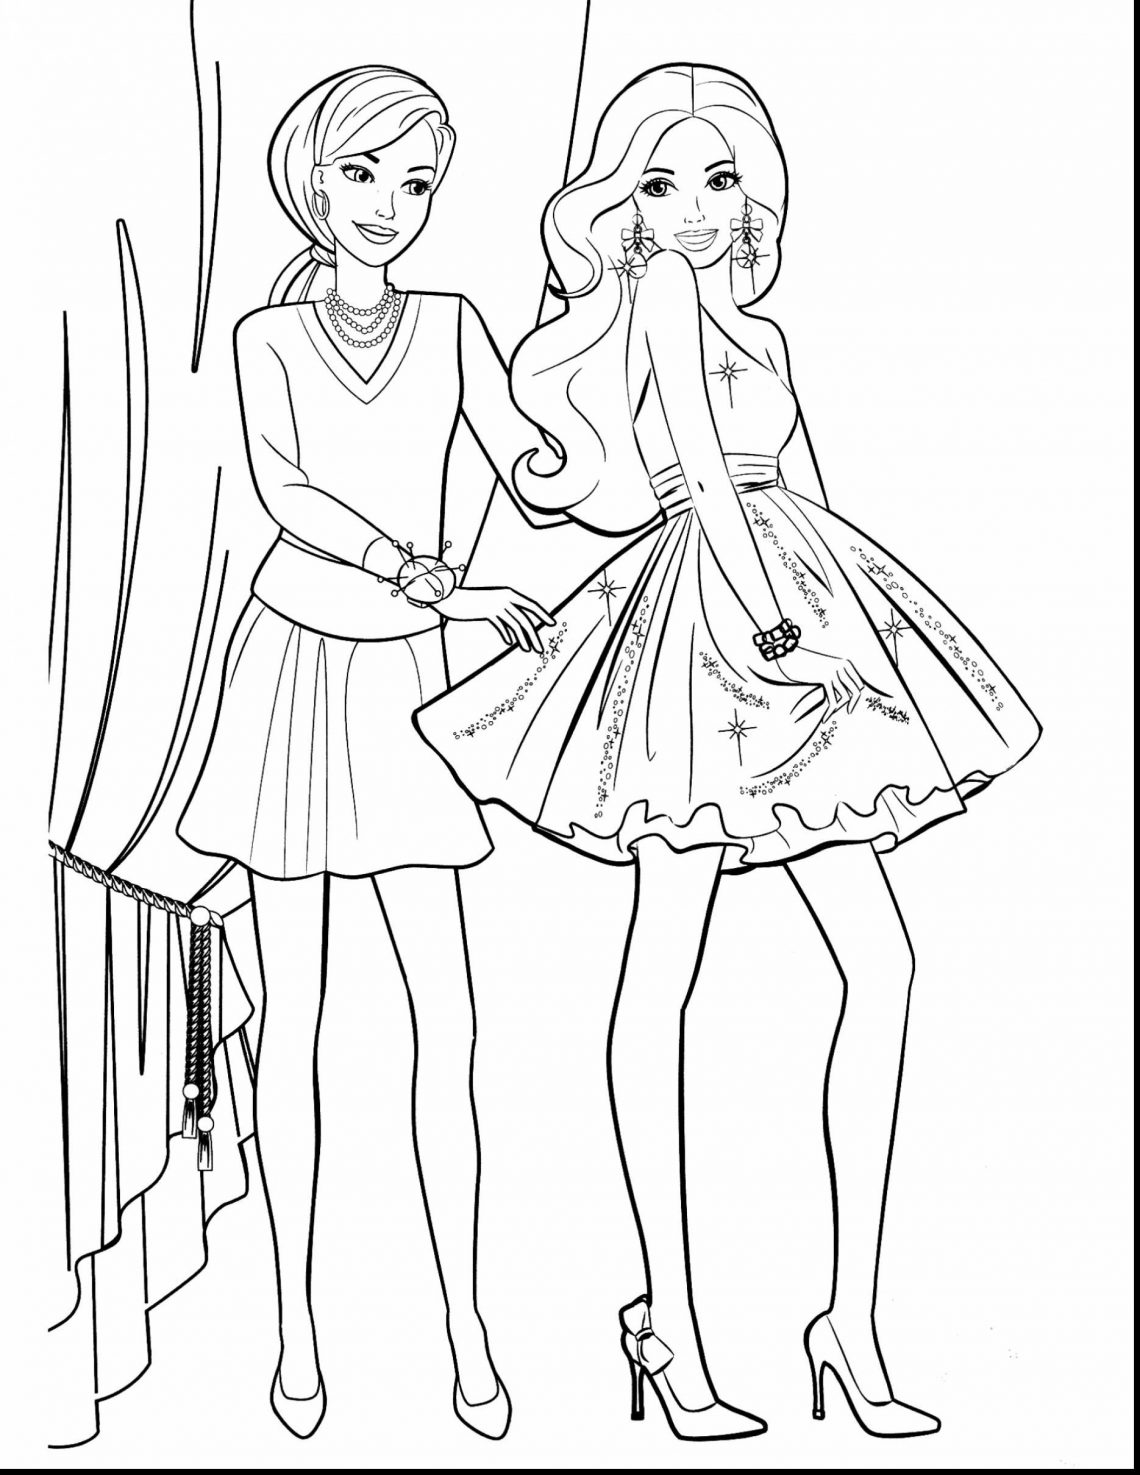 Barbie Coloring Pages For Kid Girls - Visual Arts Ideas